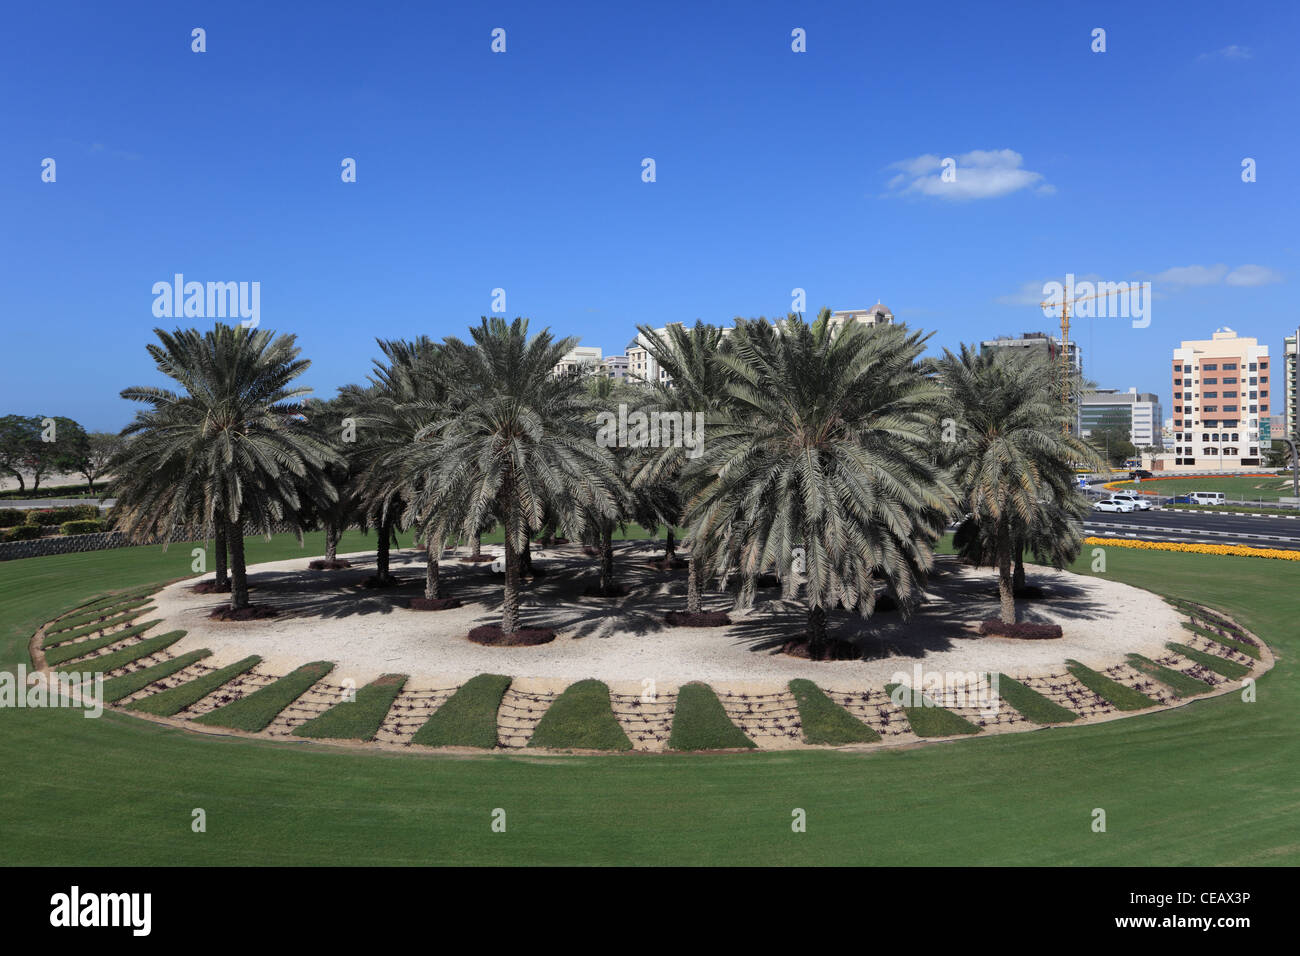 Palm Trees at a roundabout in Dubai, United Arab Emirates Stock Photo